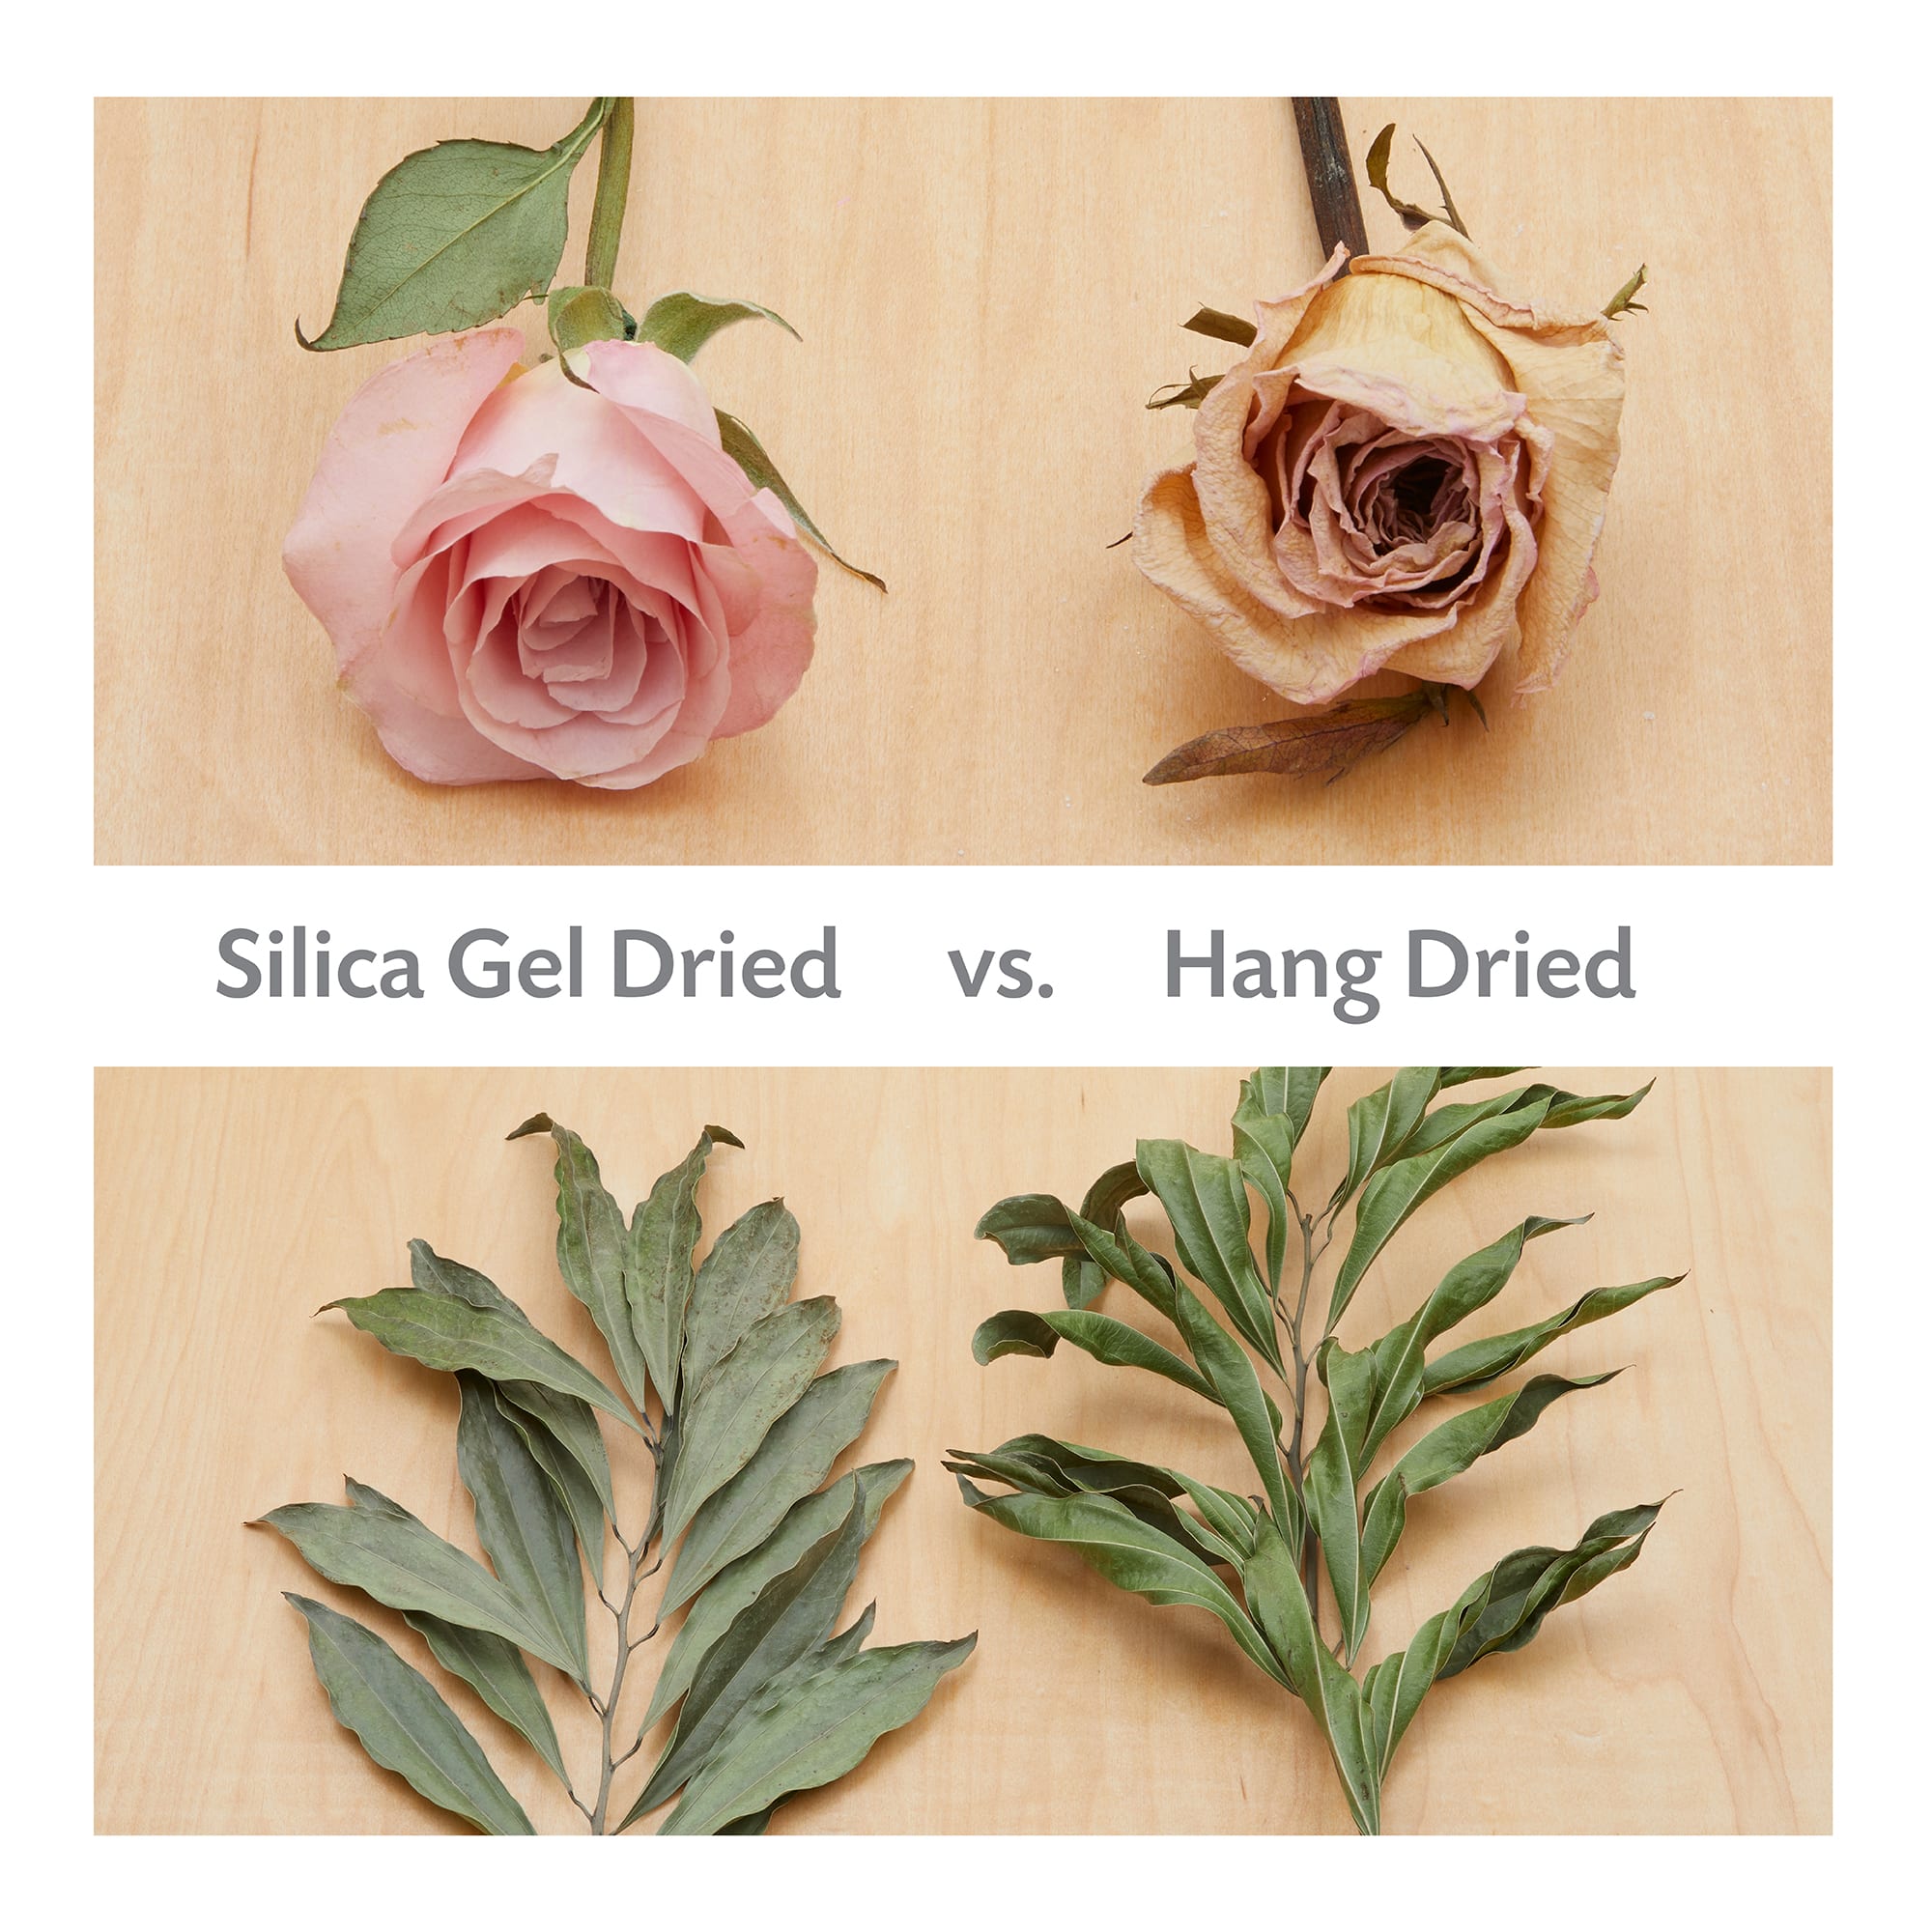 Using silica gel to dry flowers